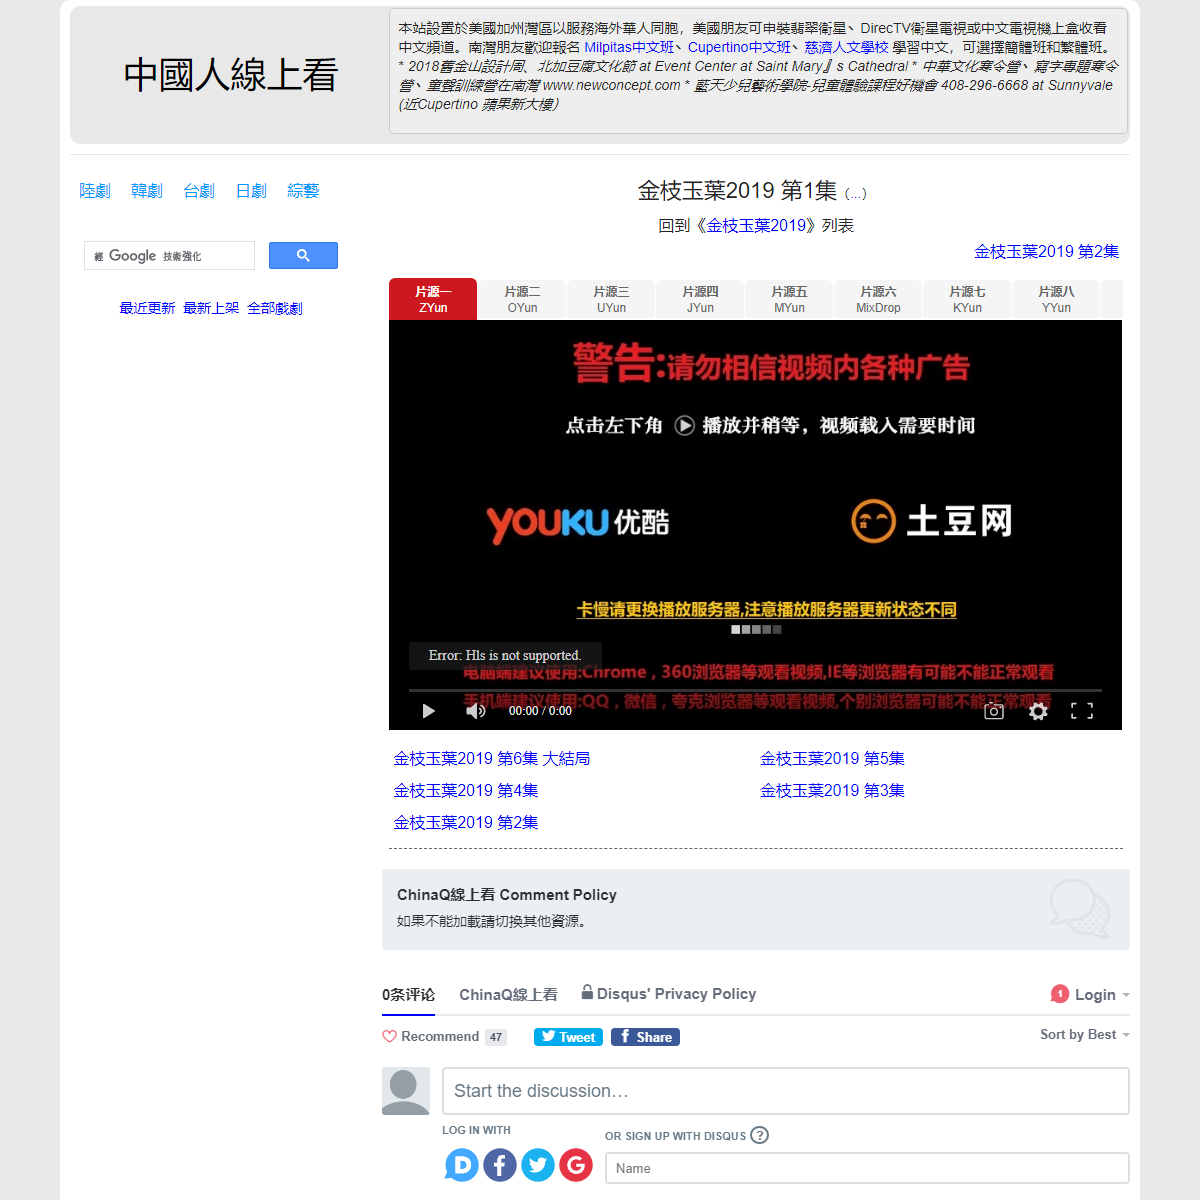 A complete backup of https://chinaq.tv/cn191231/1.html